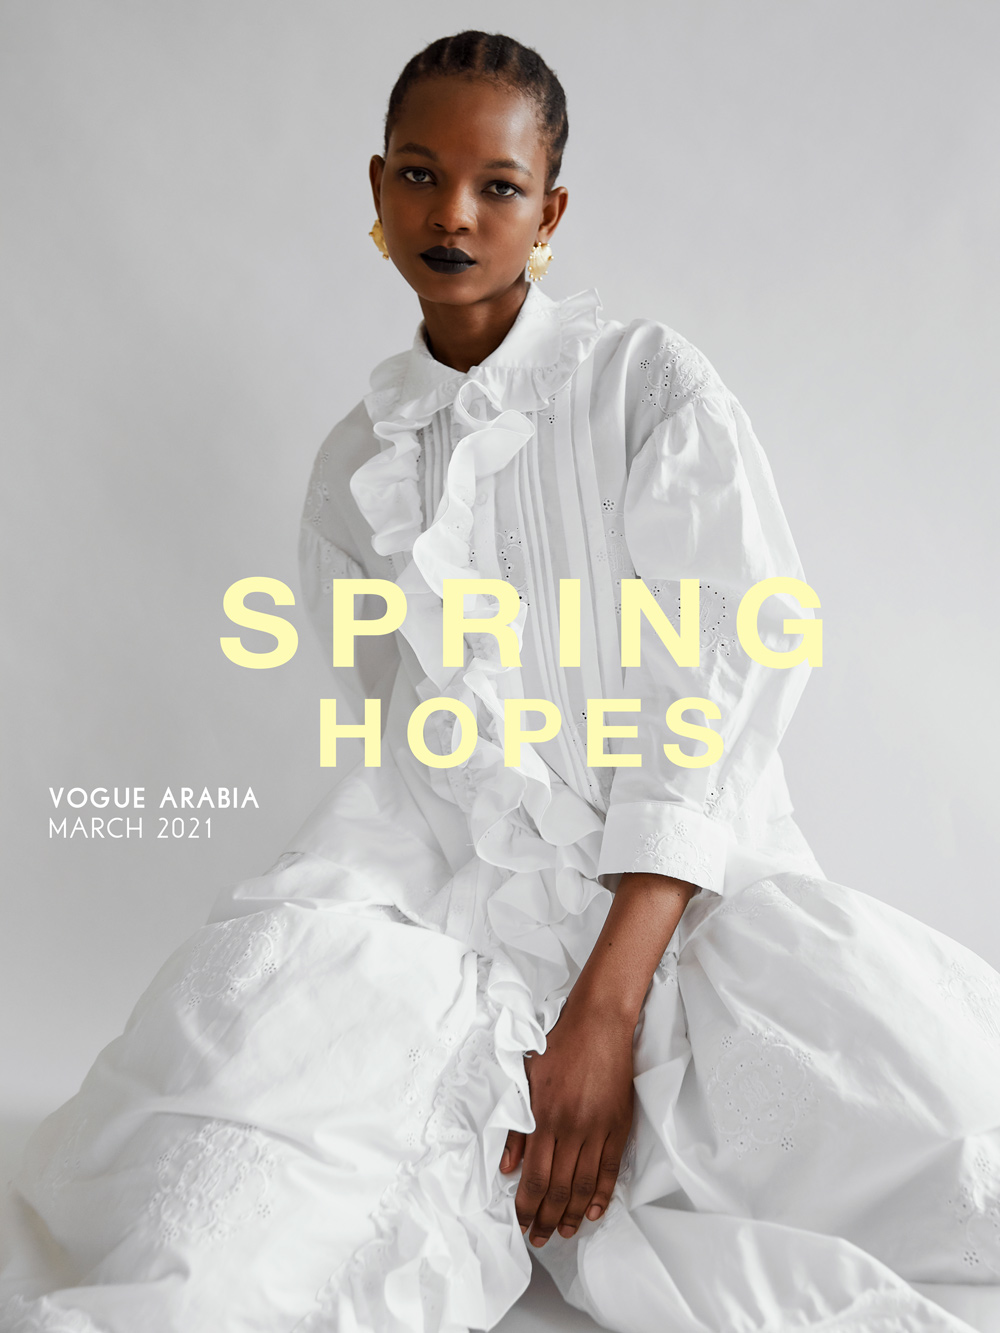 VOGUE ARABIA – Spring Hopes March 2021